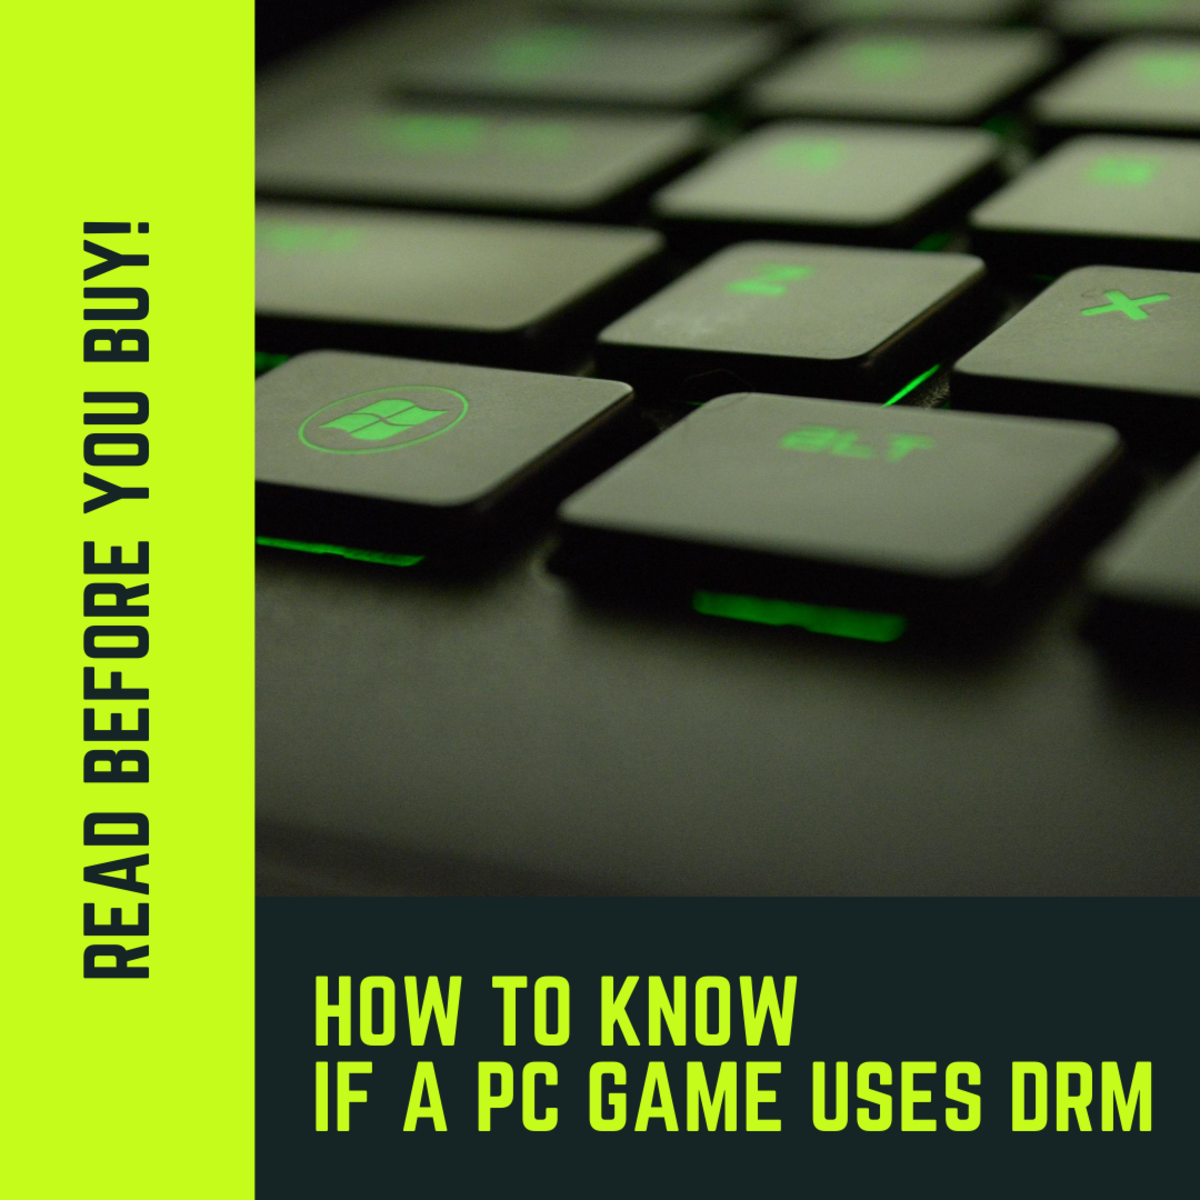 10 Ways to Find Out if a PC Game Uses DRM